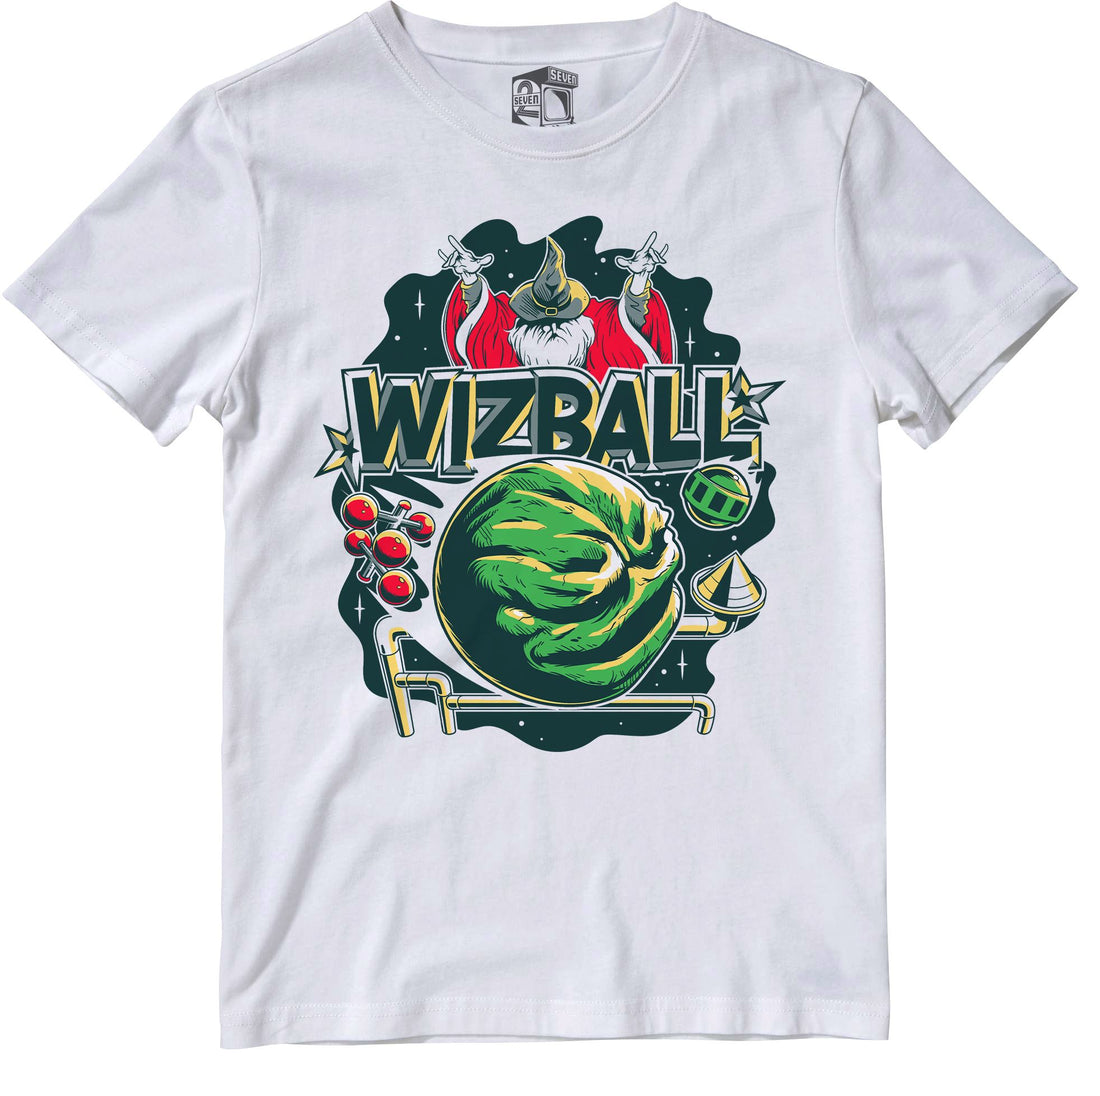 GREEN WITH ENVY.. THE WIZARDING WORLD OF WIZBALL...